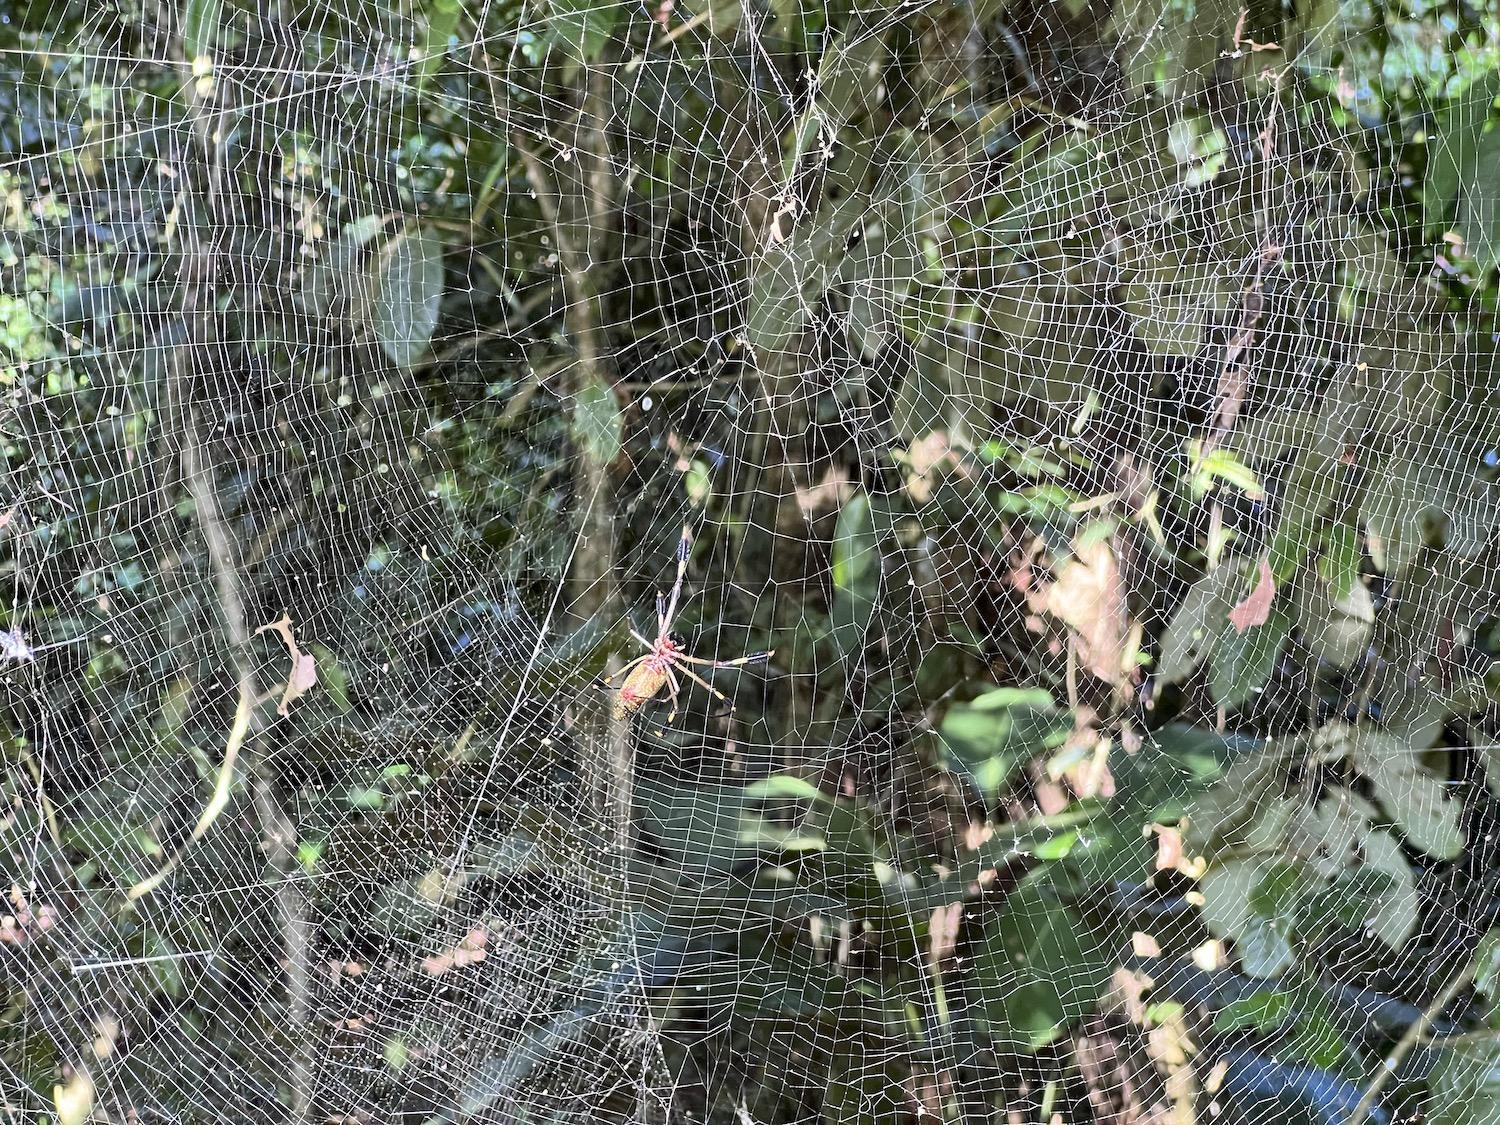 They're hard to photograph by the webs of golden silk orb-weavers are elaborate.